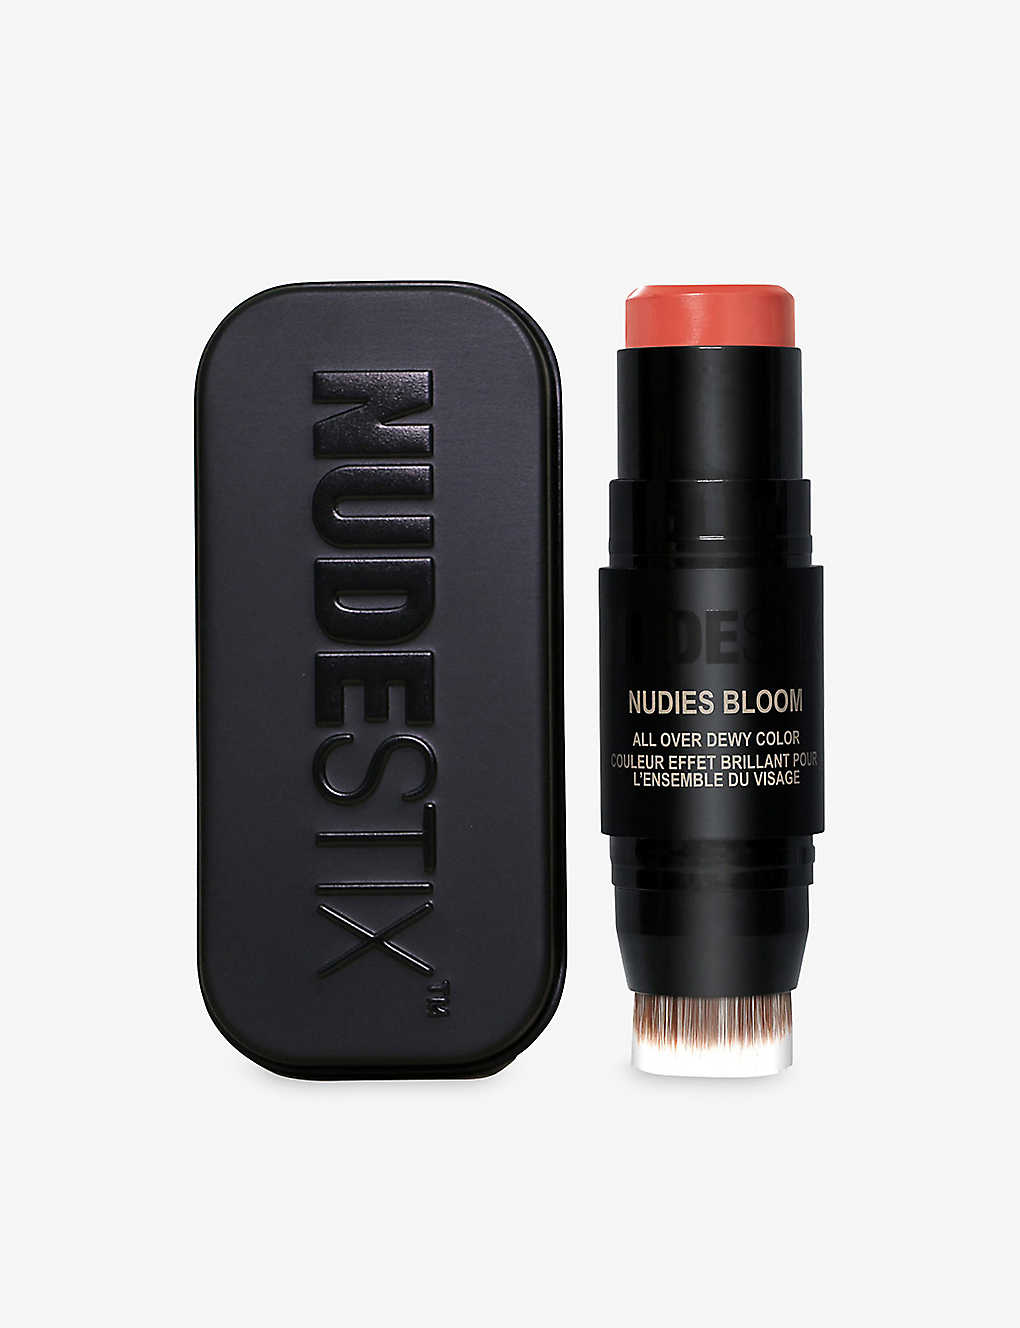 Nudestix Sweet Cheeks Nudies Bloom All-over Dewy Face Colour 7g